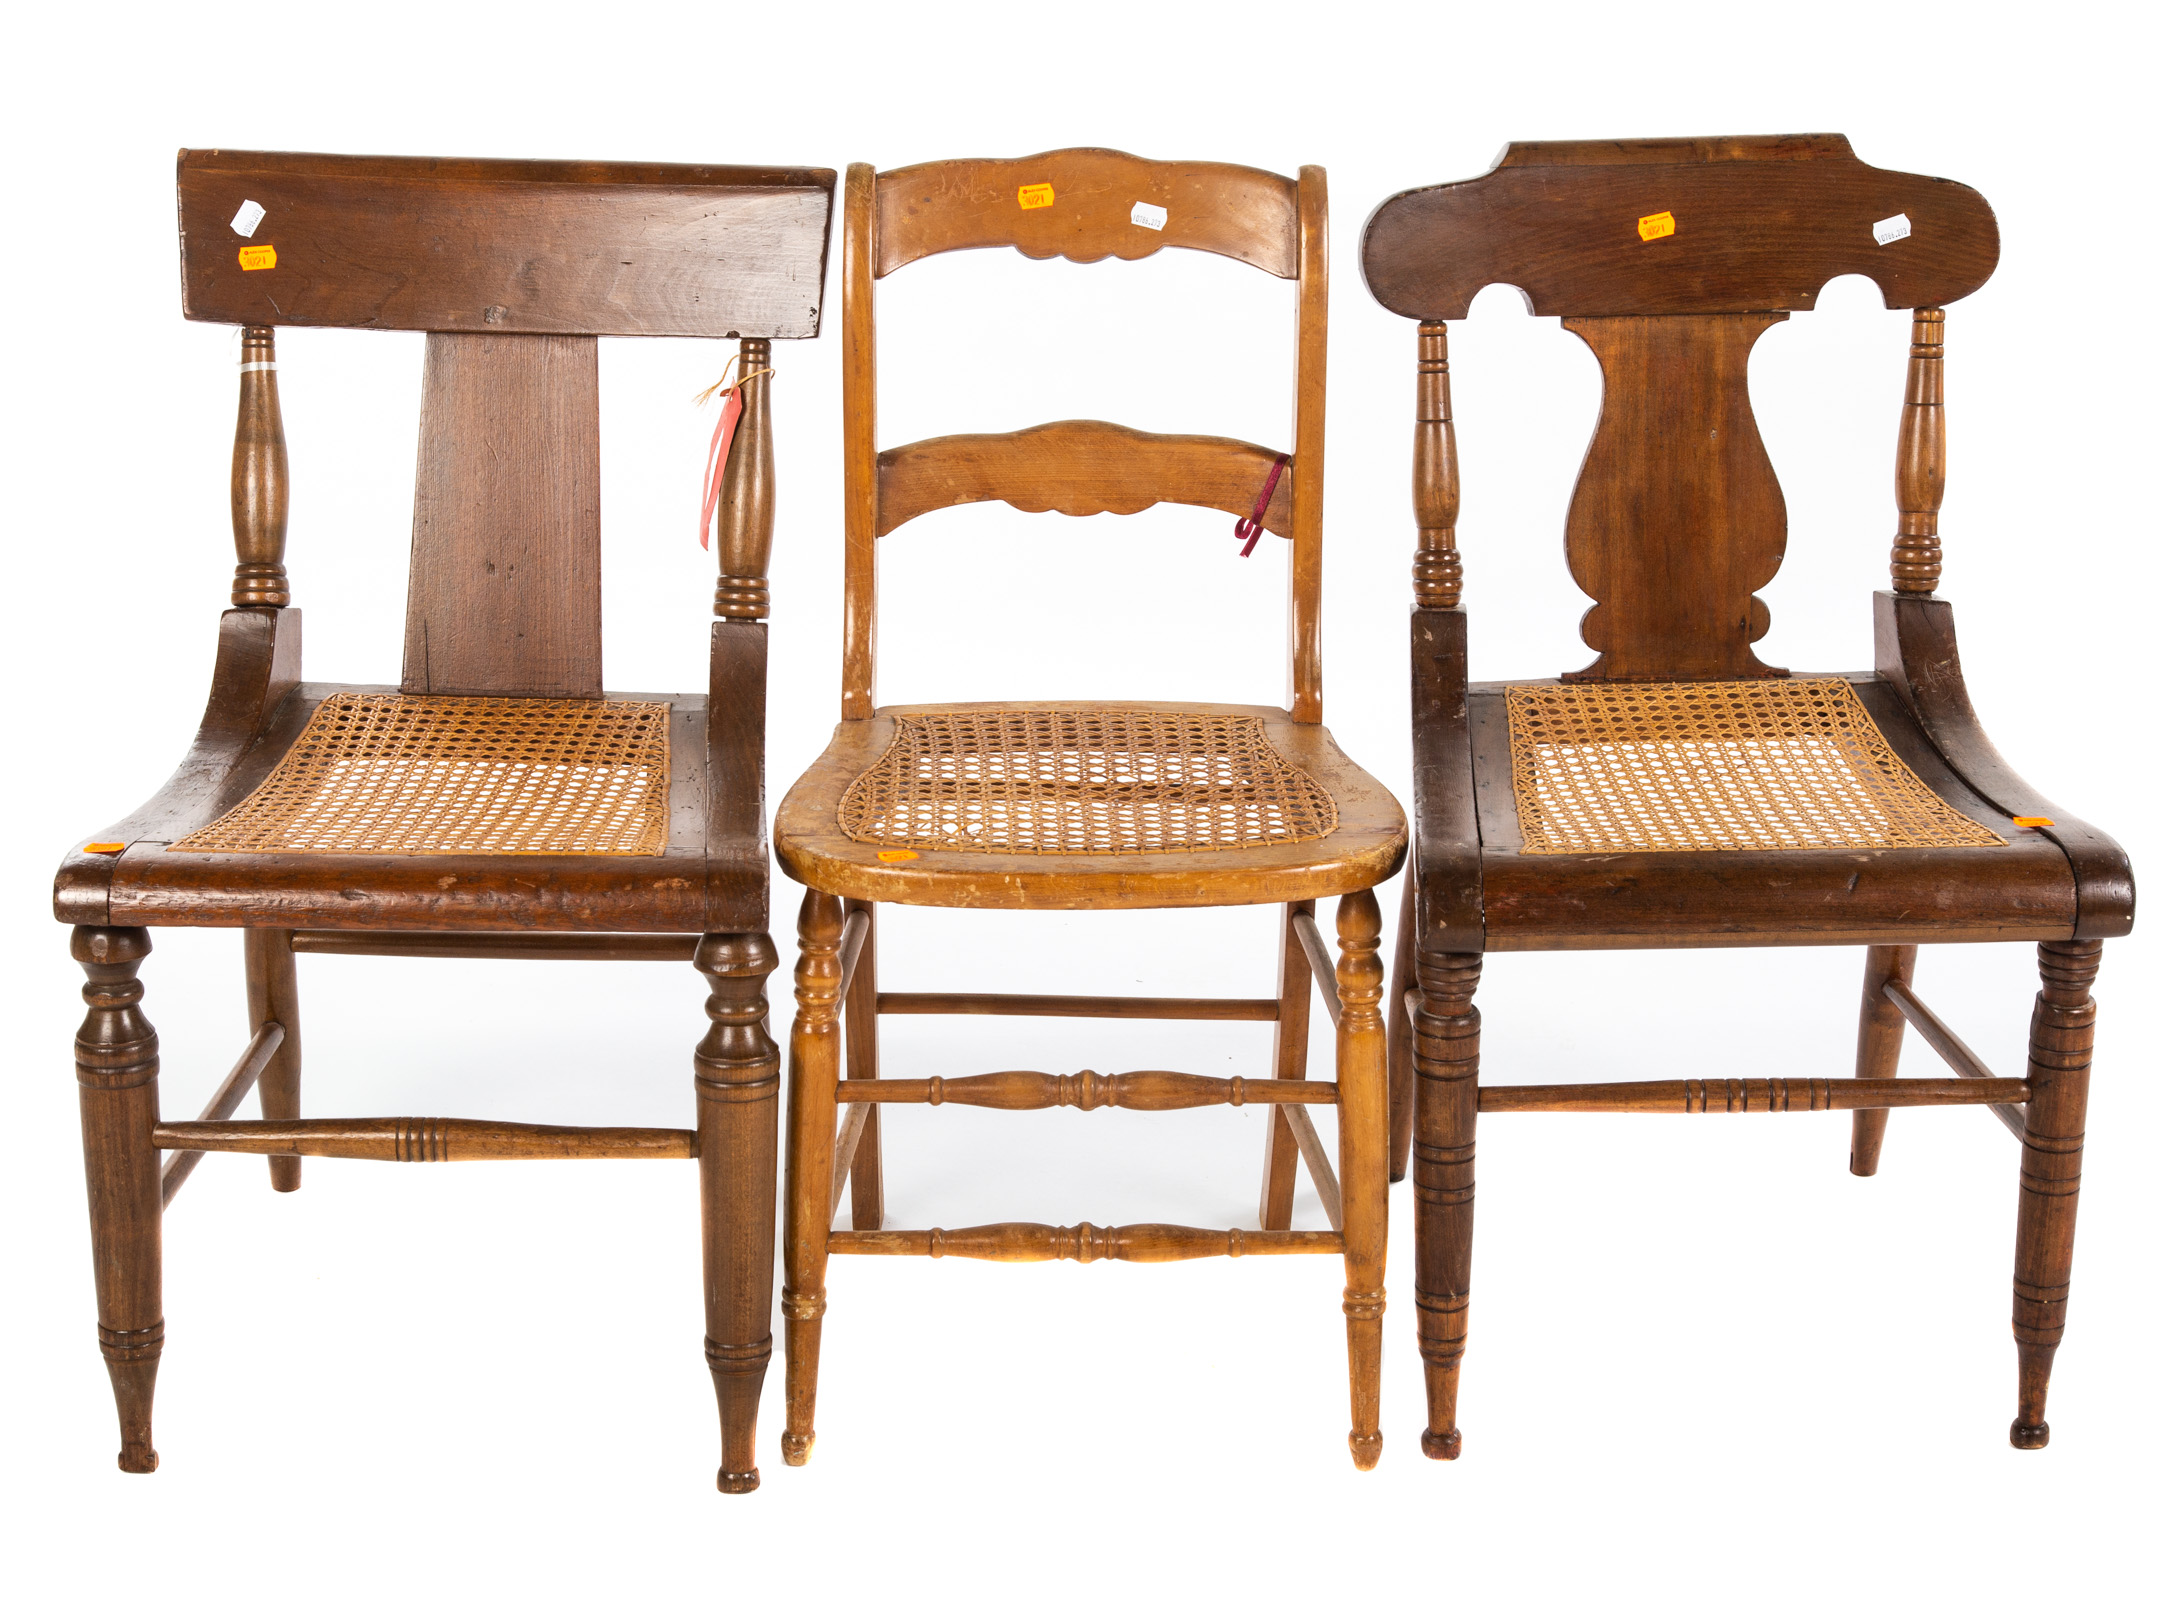 THREE WOODEN SIDE CHAIRS WITH CANE